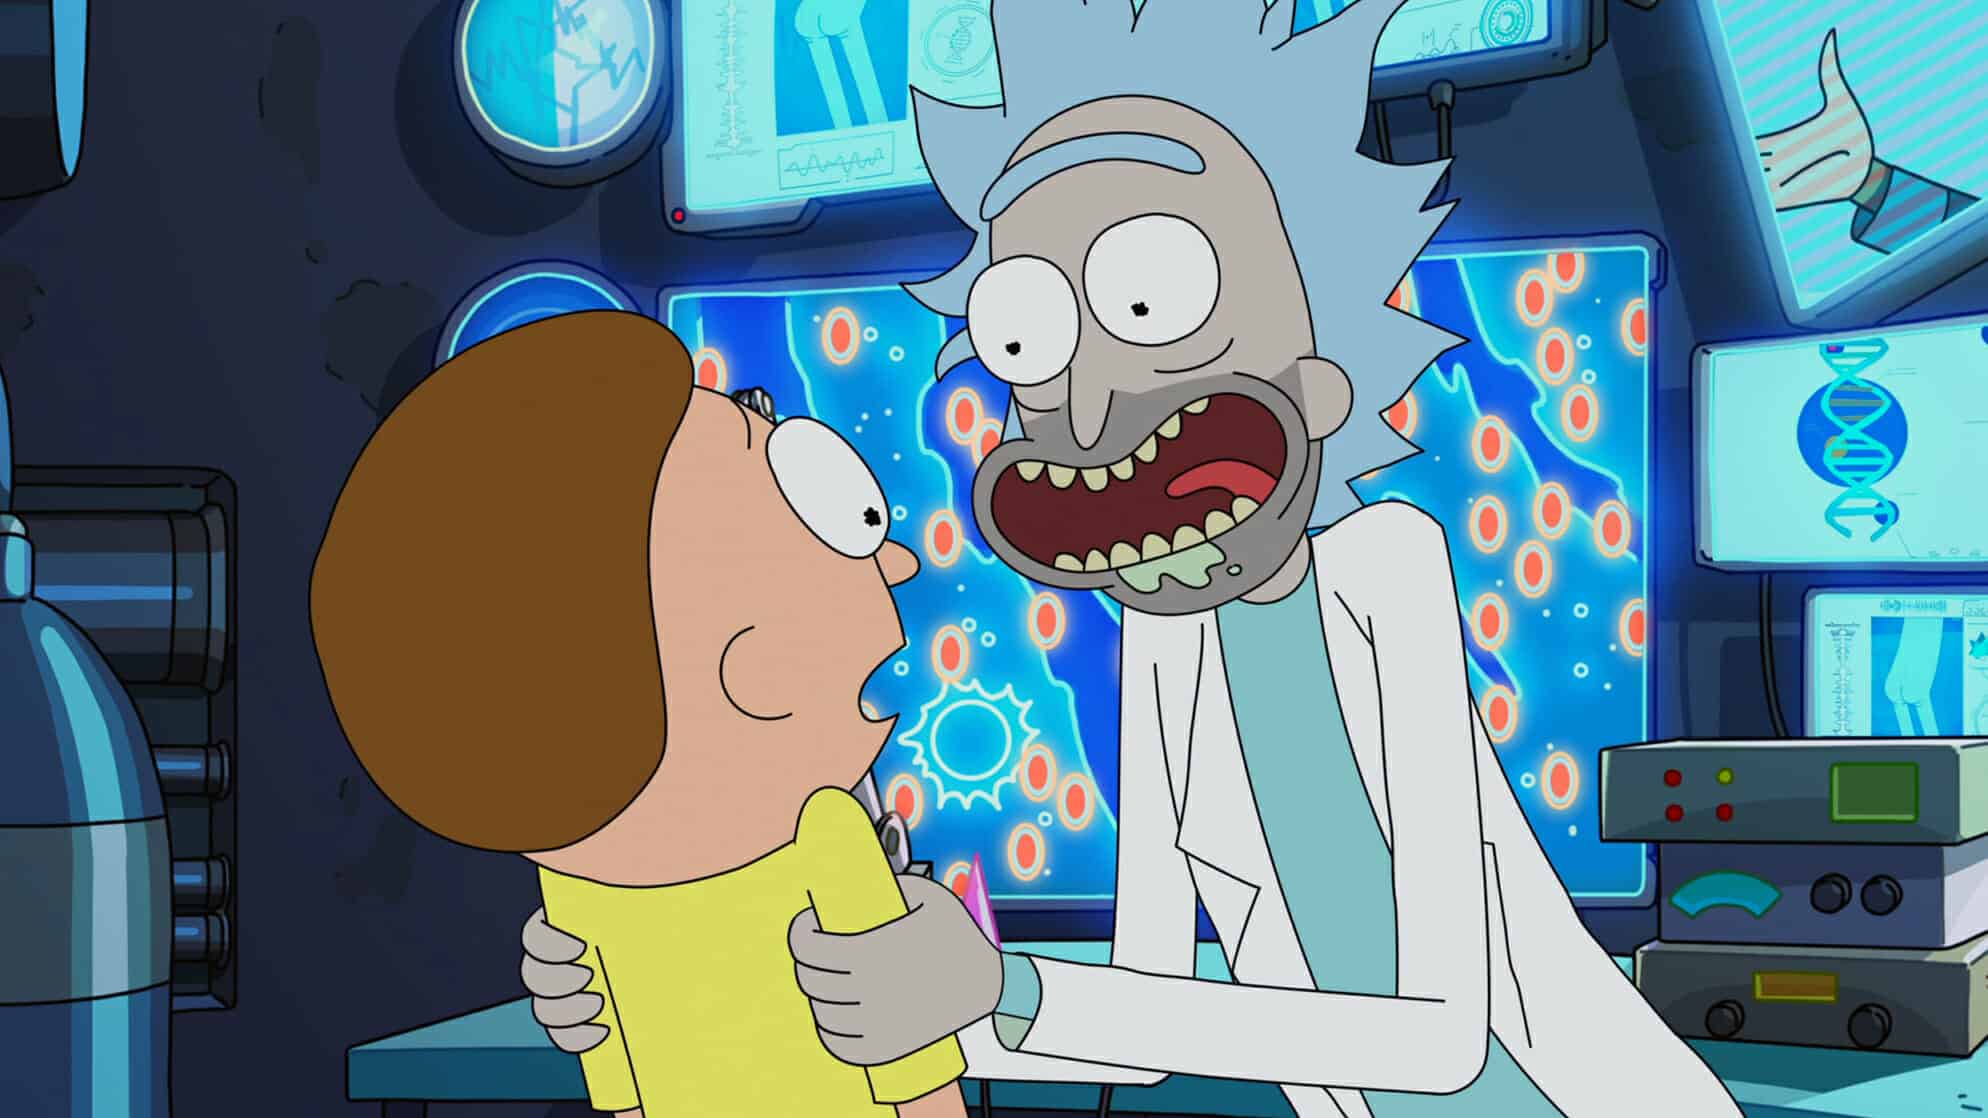 High expectations could be disastrous for Rick and Morty Season 7